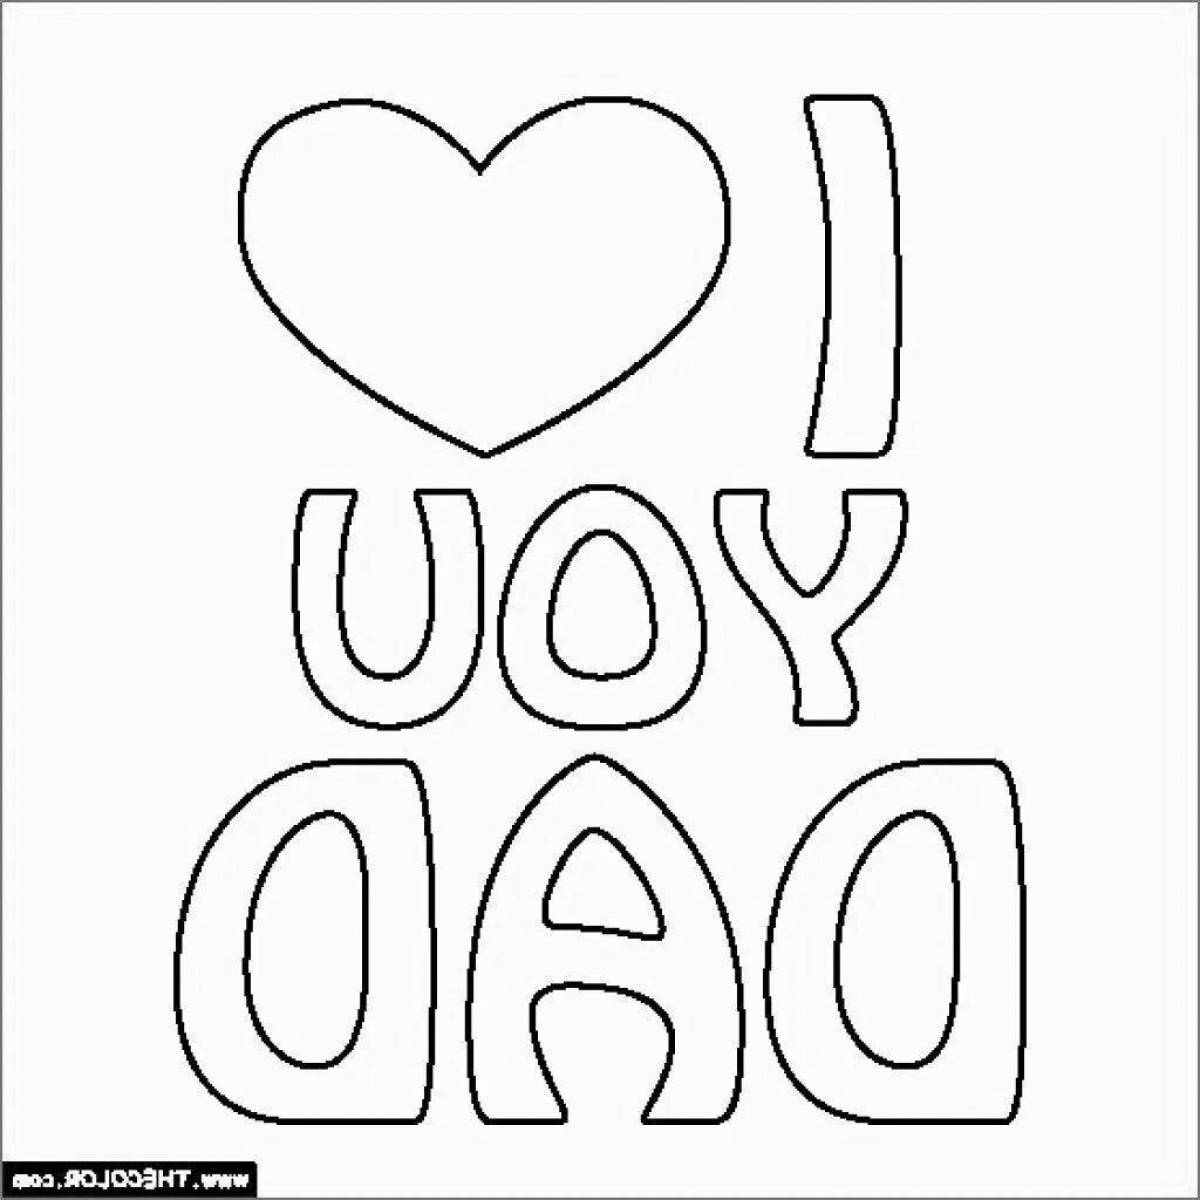 Amazing i love you dad coloring page